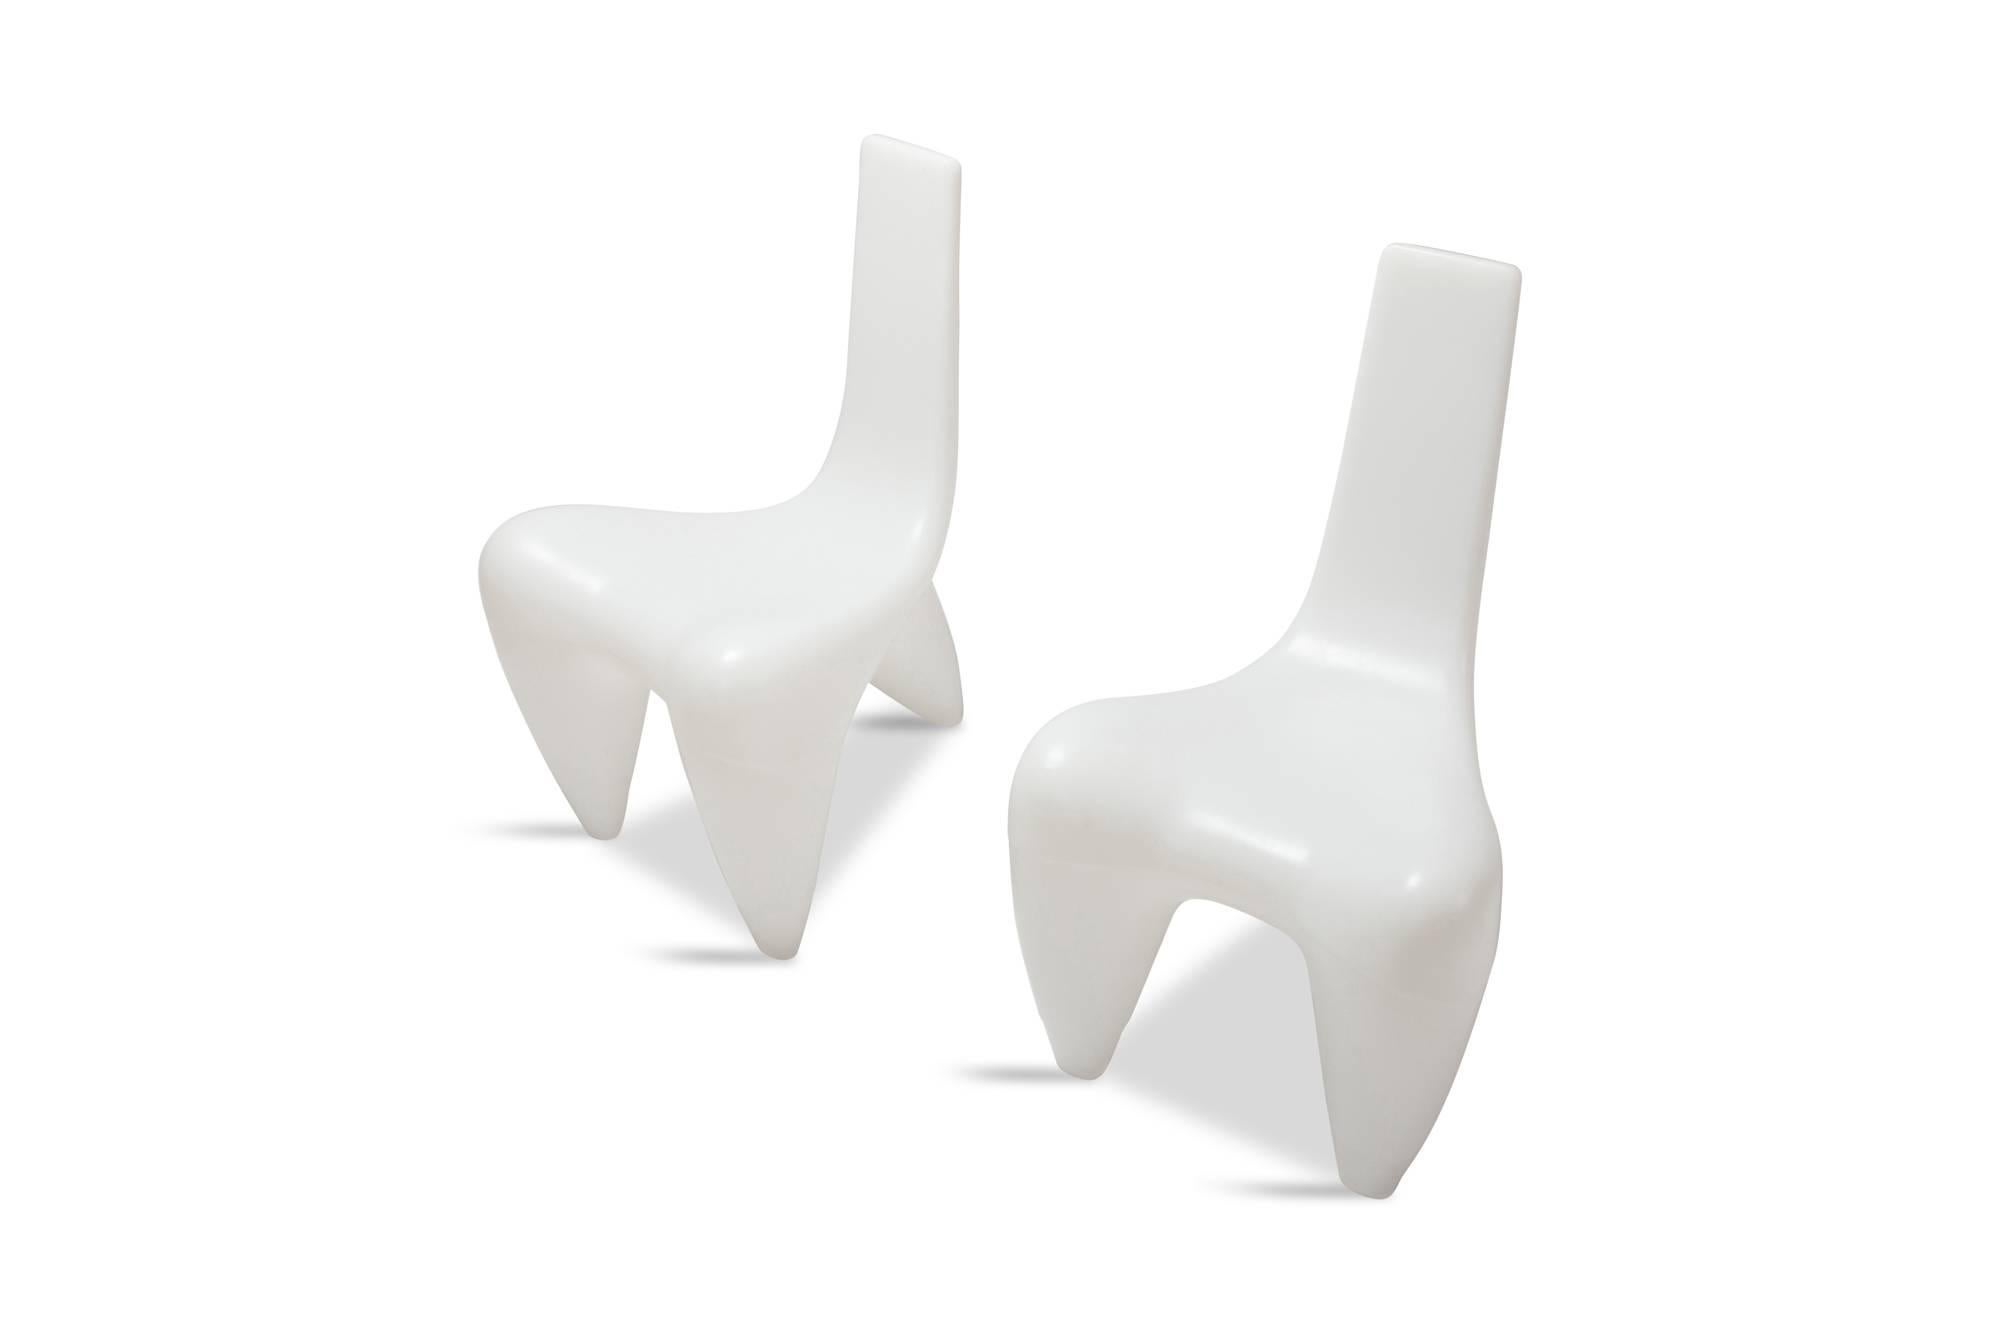 “Spidlight” chairs in white with organically shaped tripod base in polypropylene by Douglas Mont for JetNet Design, France, 2000. Due the use of material and modern appearance, these chair can serve multiple purposes, such a garden or pool furniture.